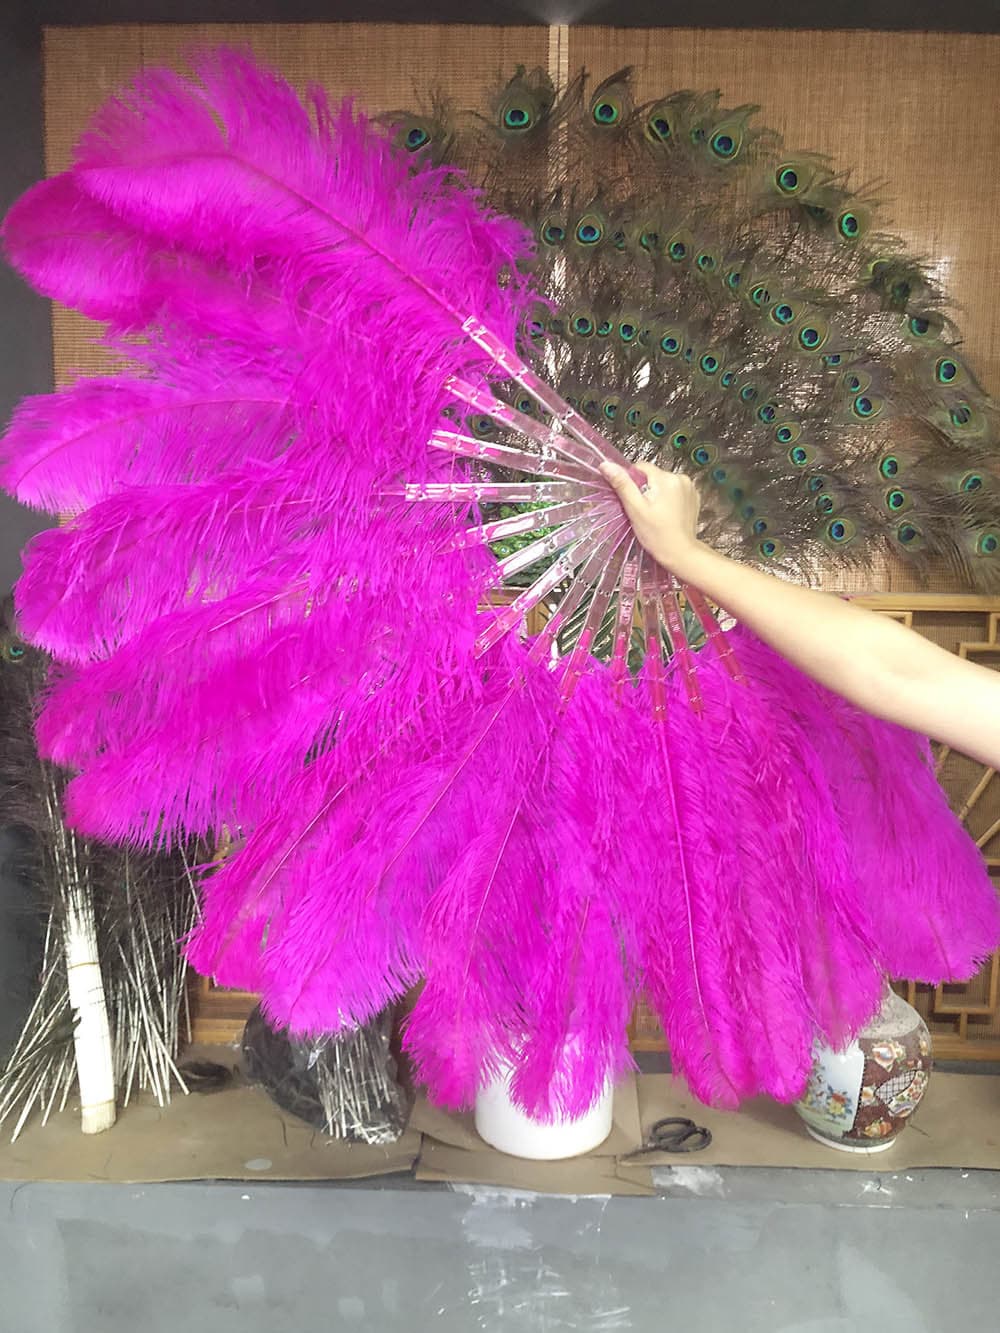 hotfans Drak Purple Marabou Ostrich Feather Fan 24x 43 with Travel Leather Bag for A Pair